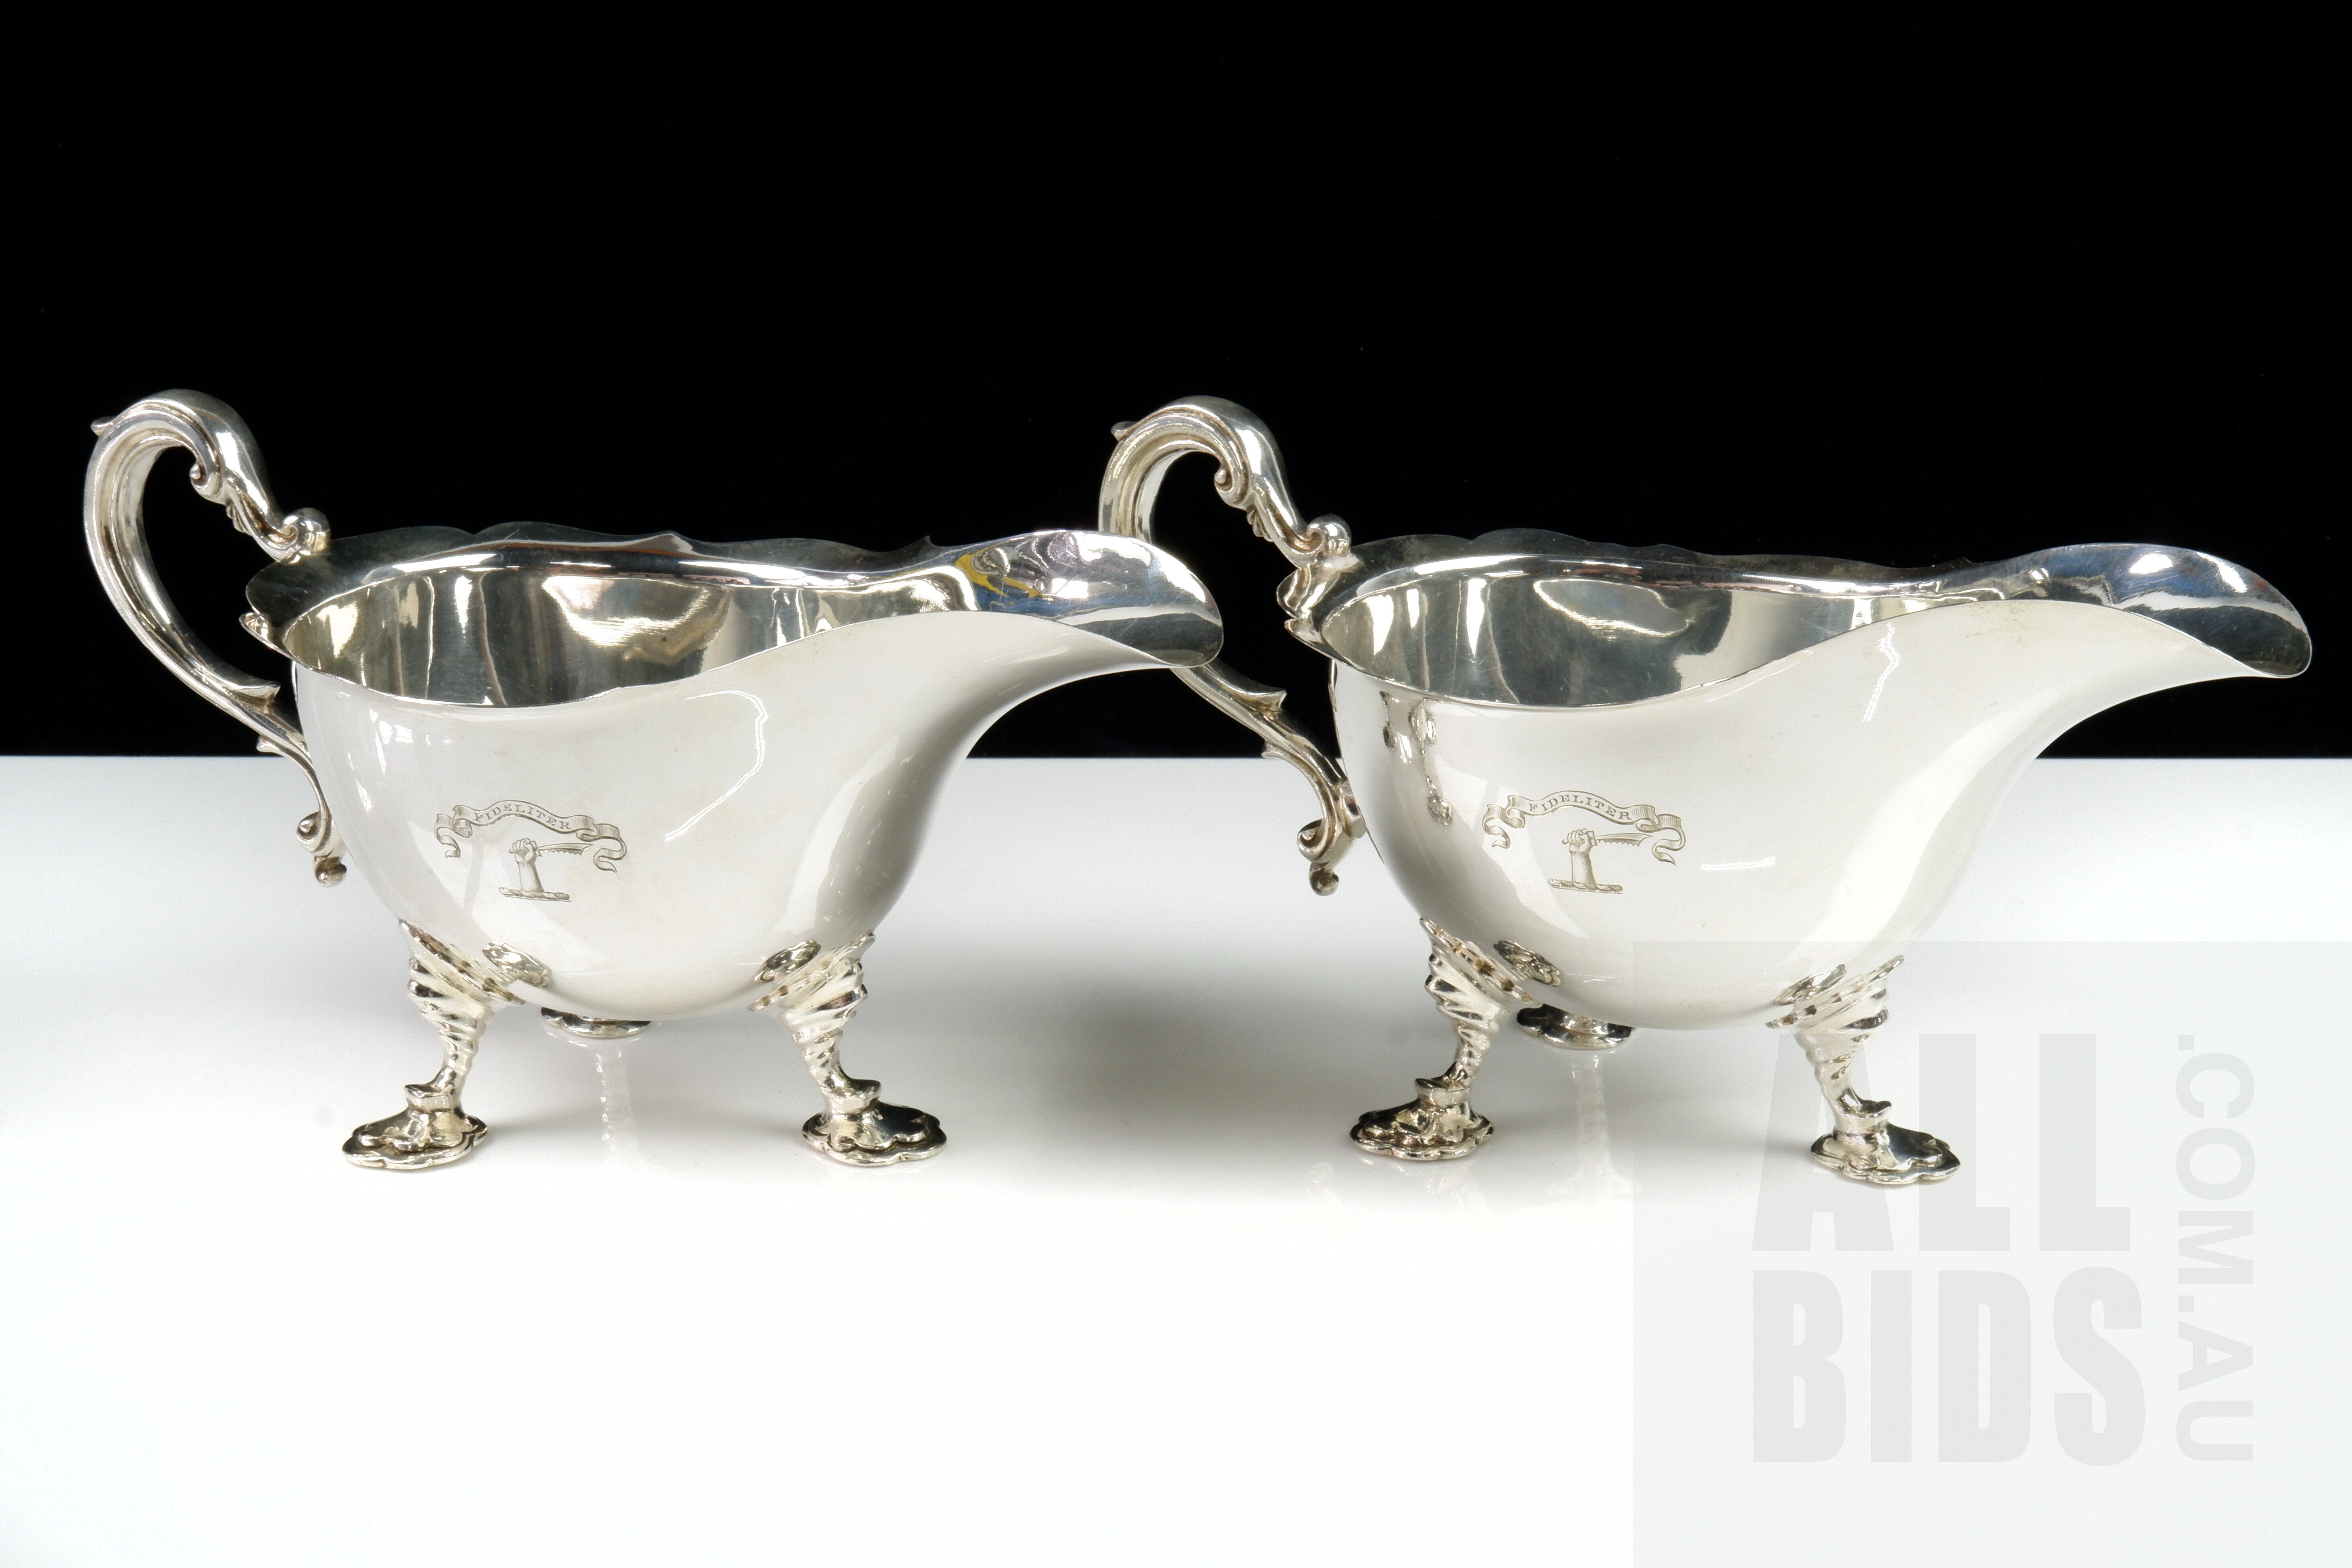 'Pair of Good Edwardian Sterling Silver Gravy Boats with Engraved Armorial Crest, J & J Maxfield, Sheffield, 1906, 891g'